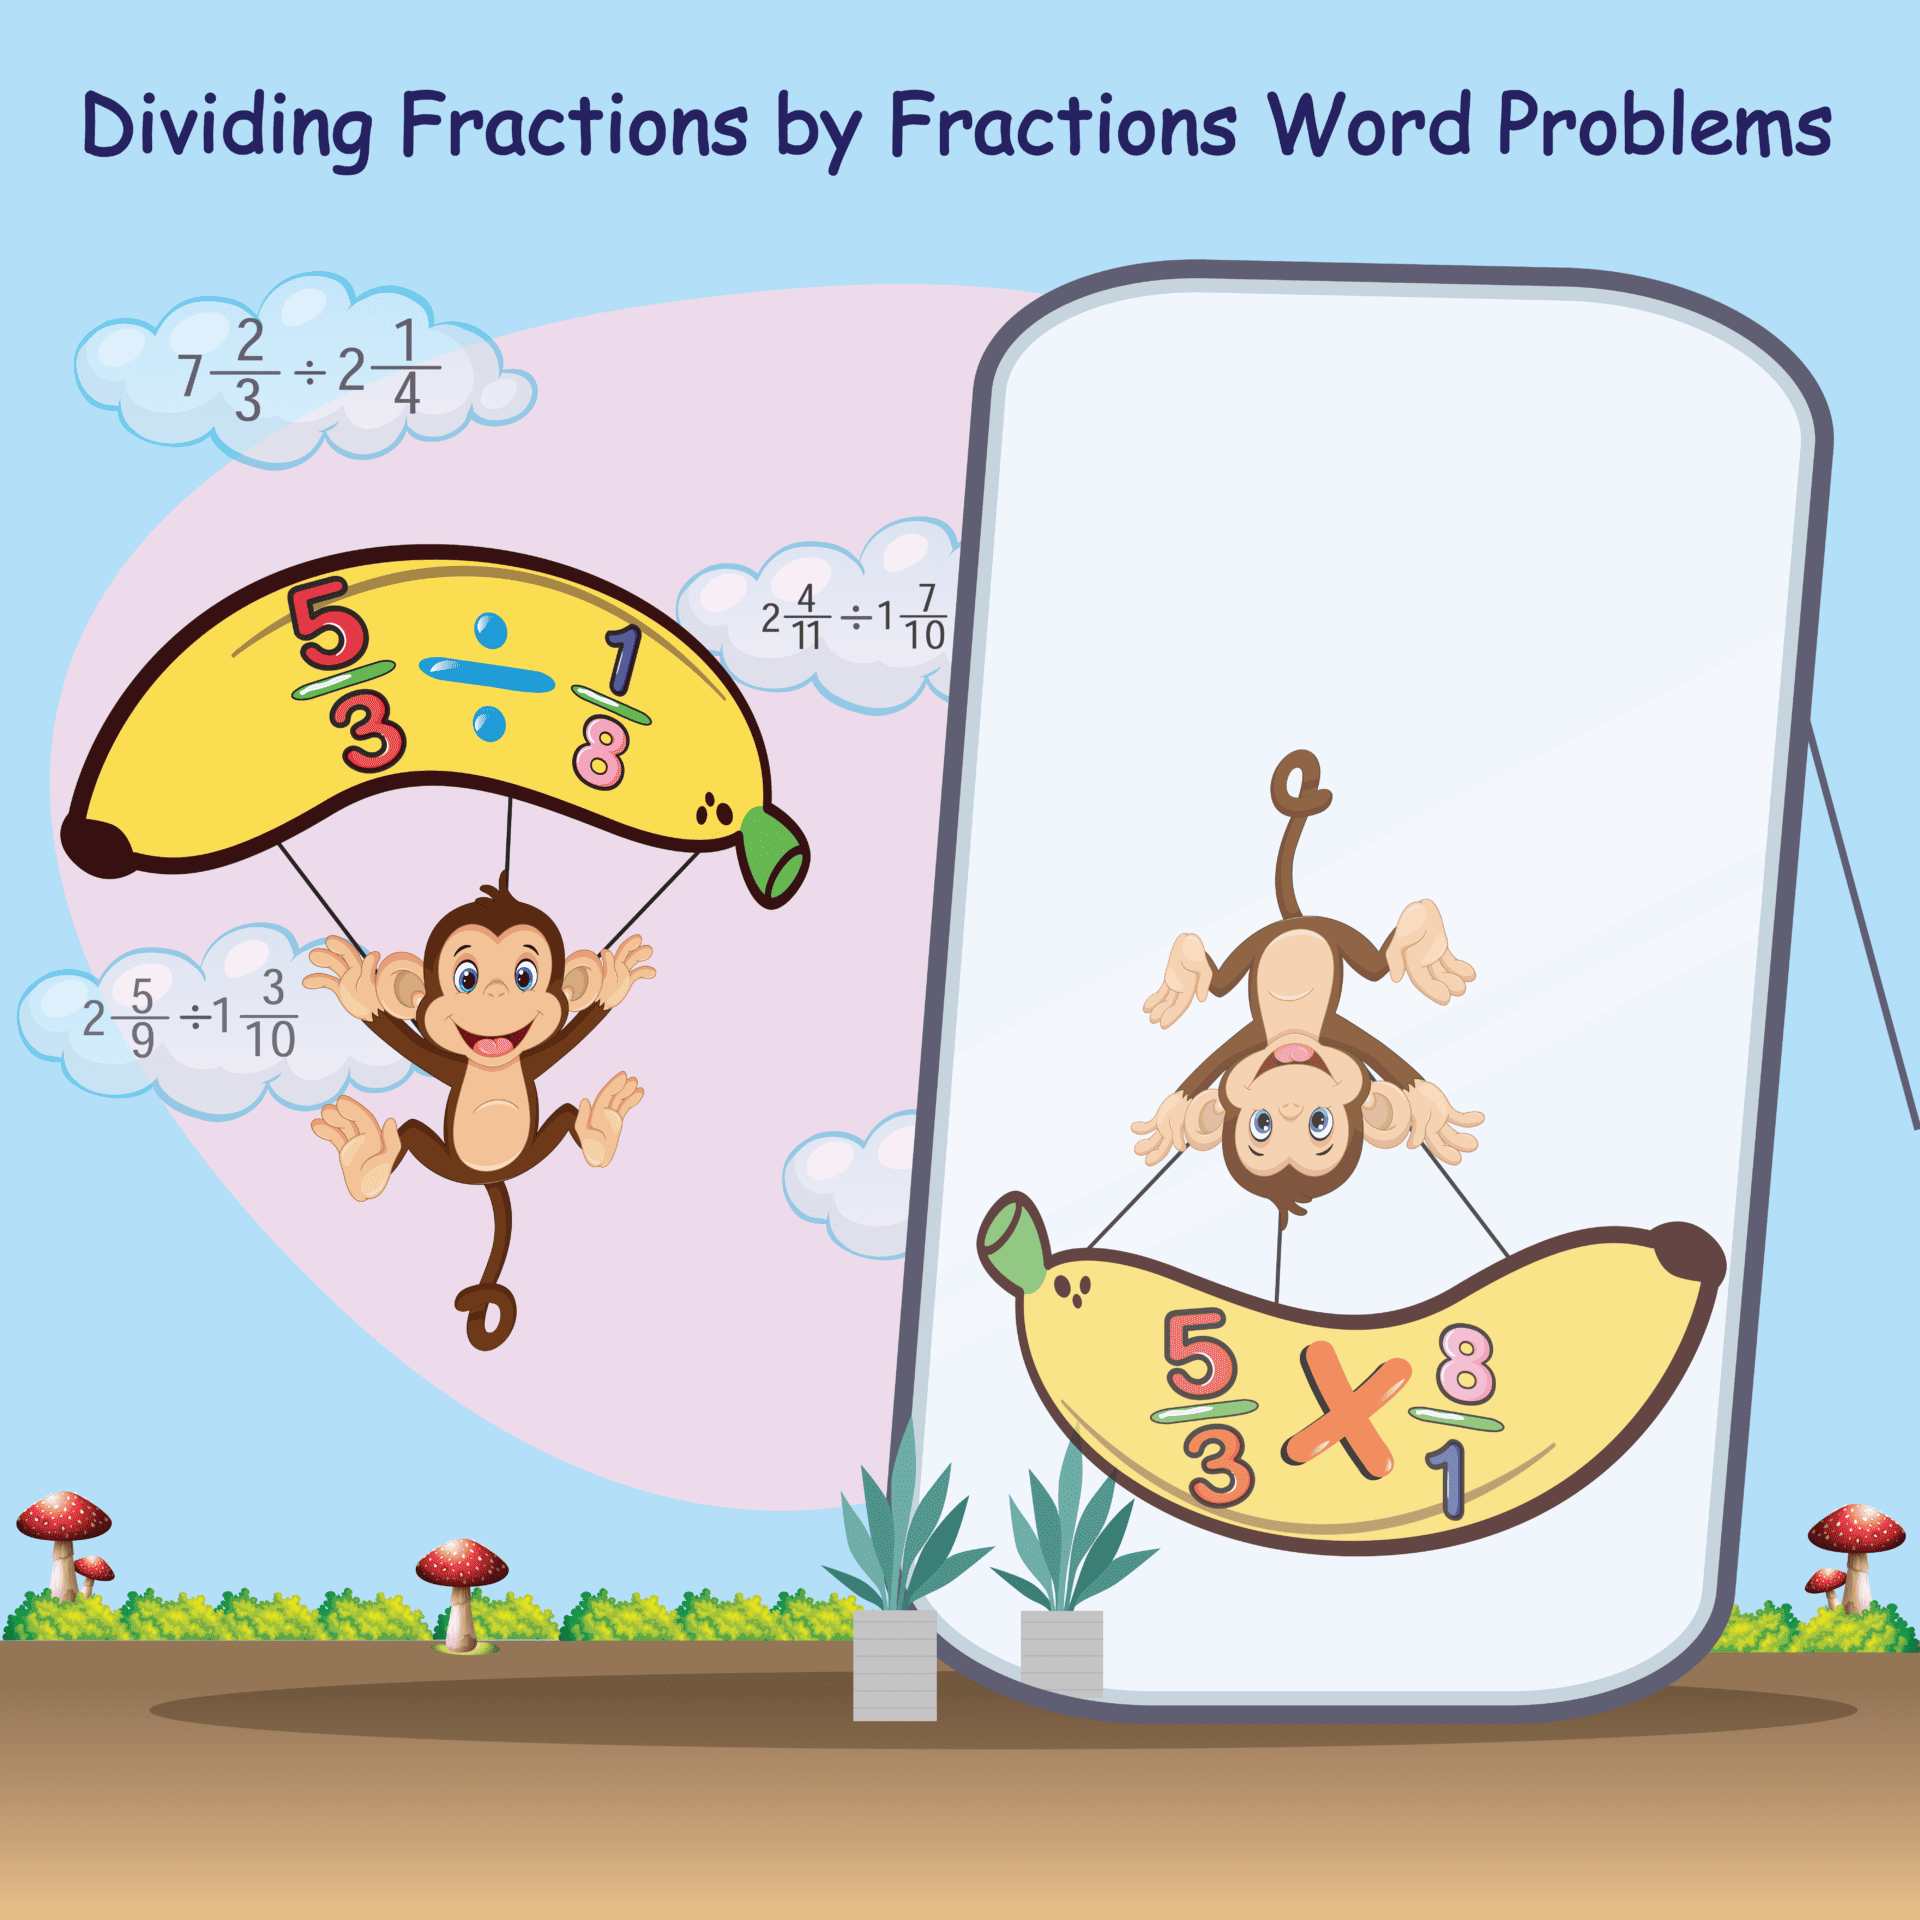 Dividing fractions by fractions word problems overview